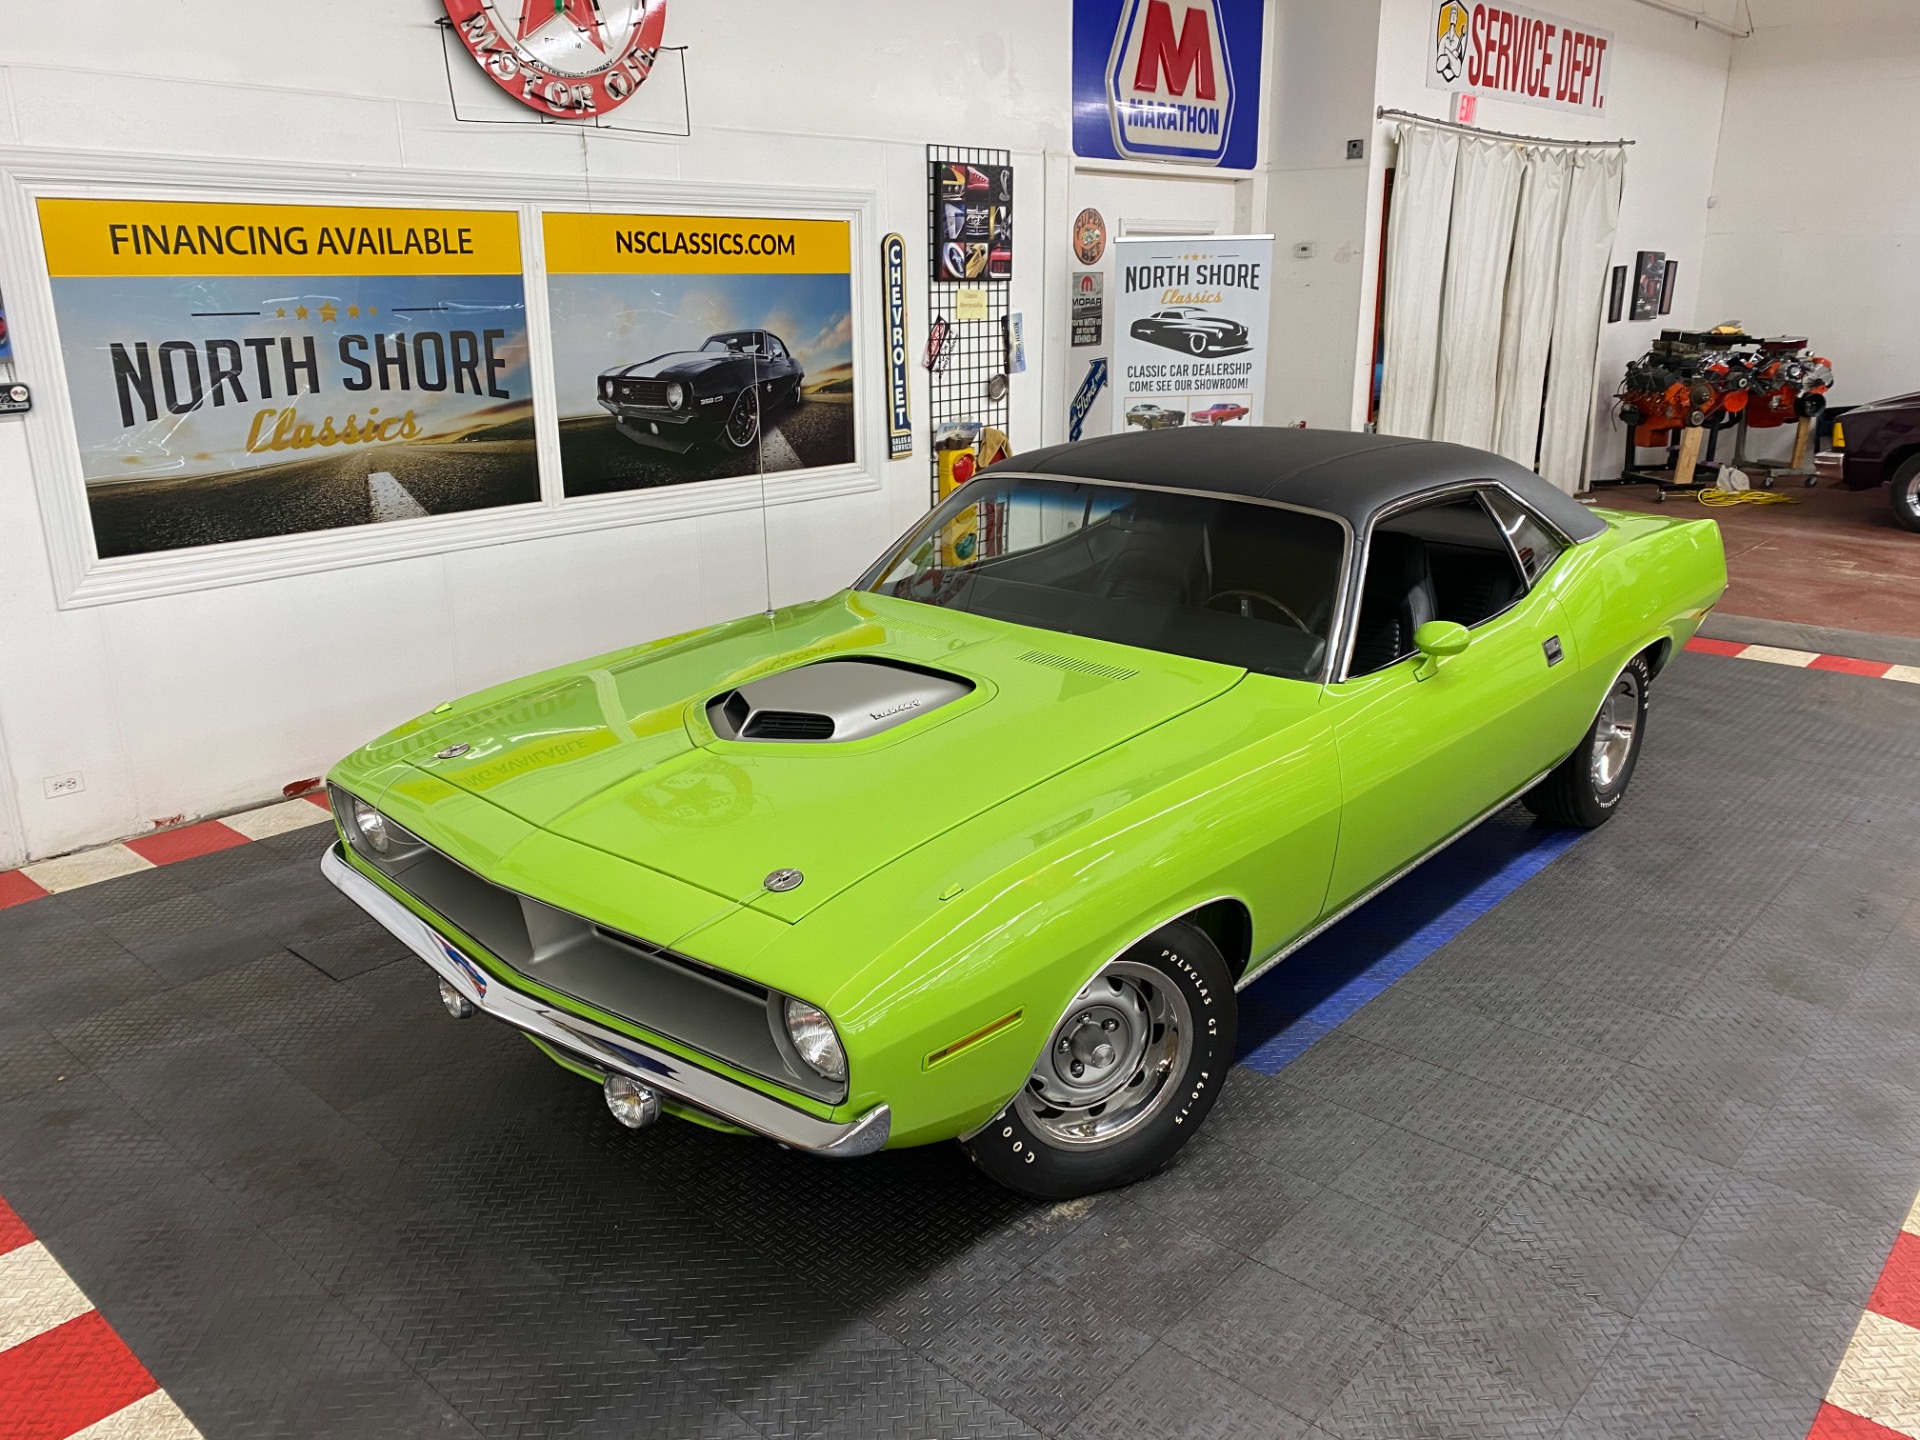 Used 1970 Plymouth Cuda Rare Sub Lime Green V Code 440 3x2 4 Speed Fender See Video For Sale Sold North Shore Classics Stock nsc